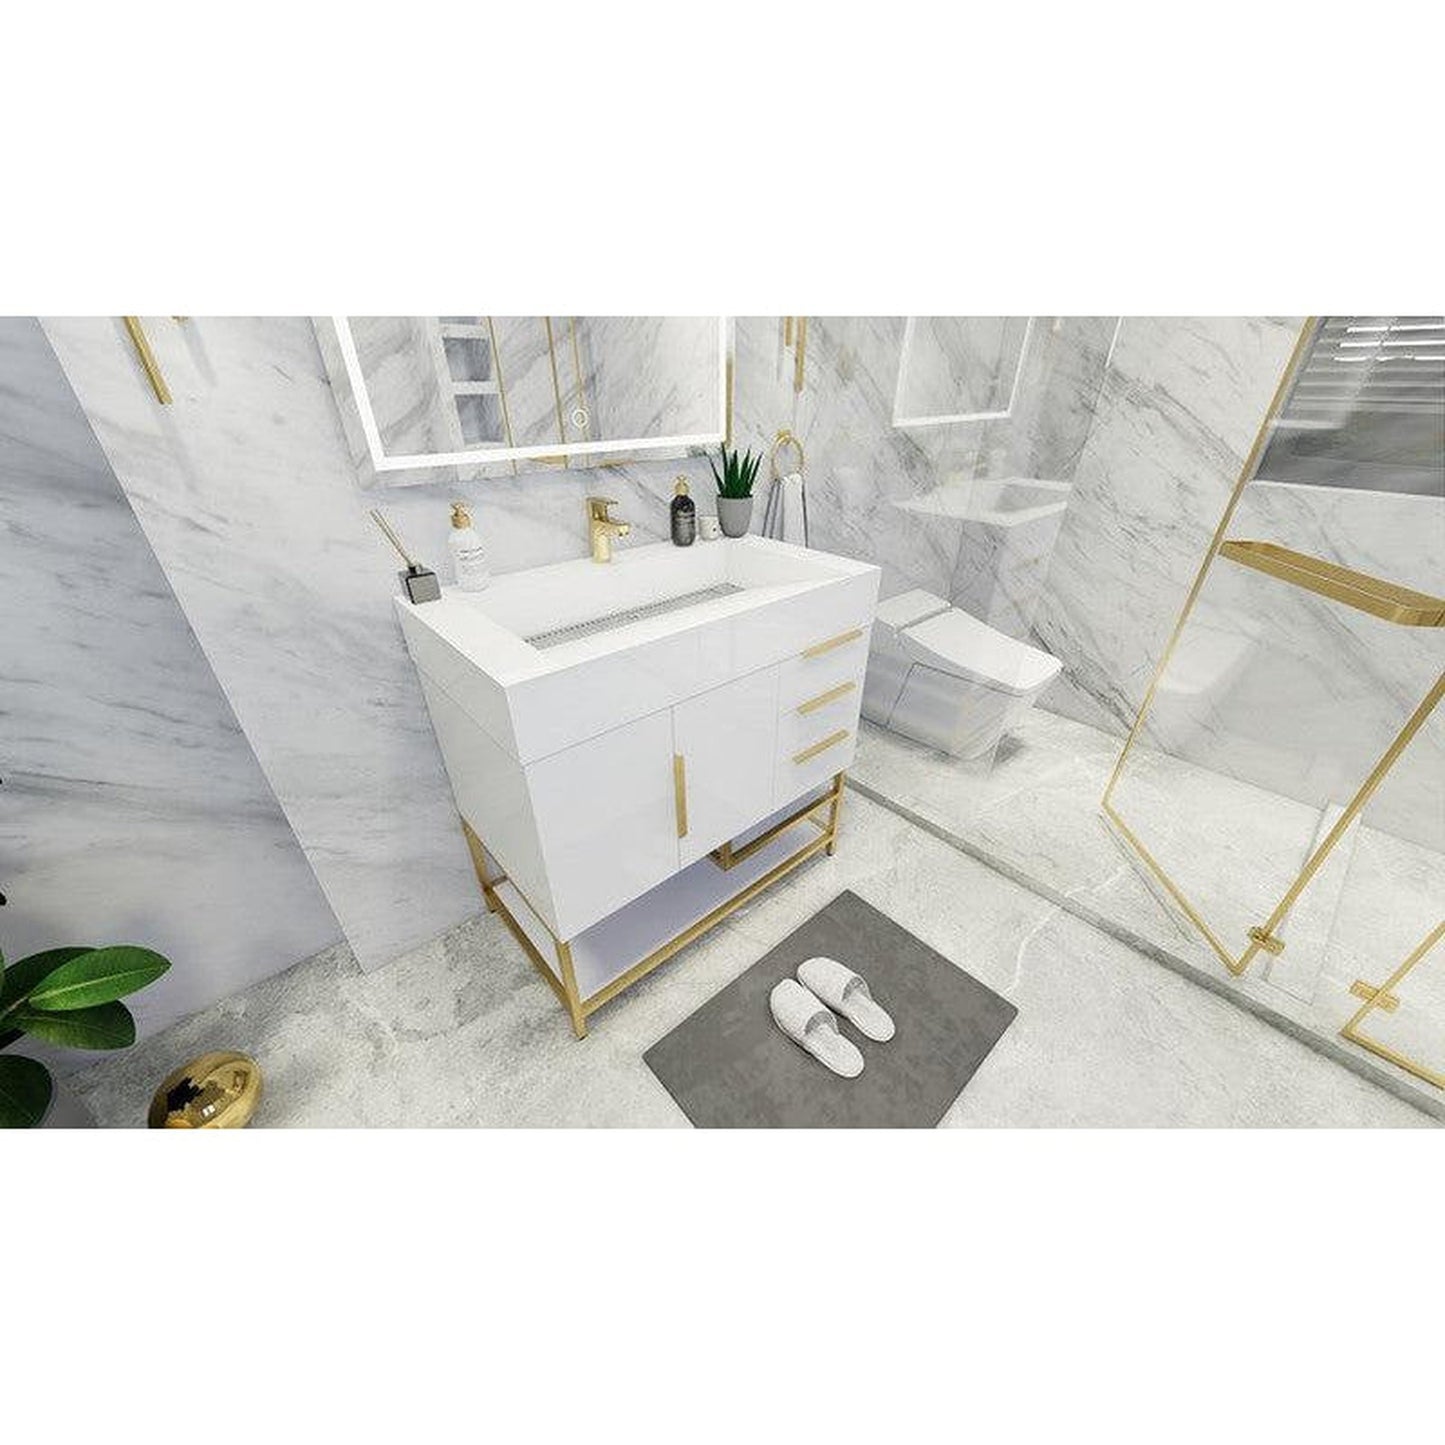 Moreno Bath Bethany 36" High Gloss White Freestanding Vanity With Right Side Drawers and Single Reinforced White Acrylic Sink